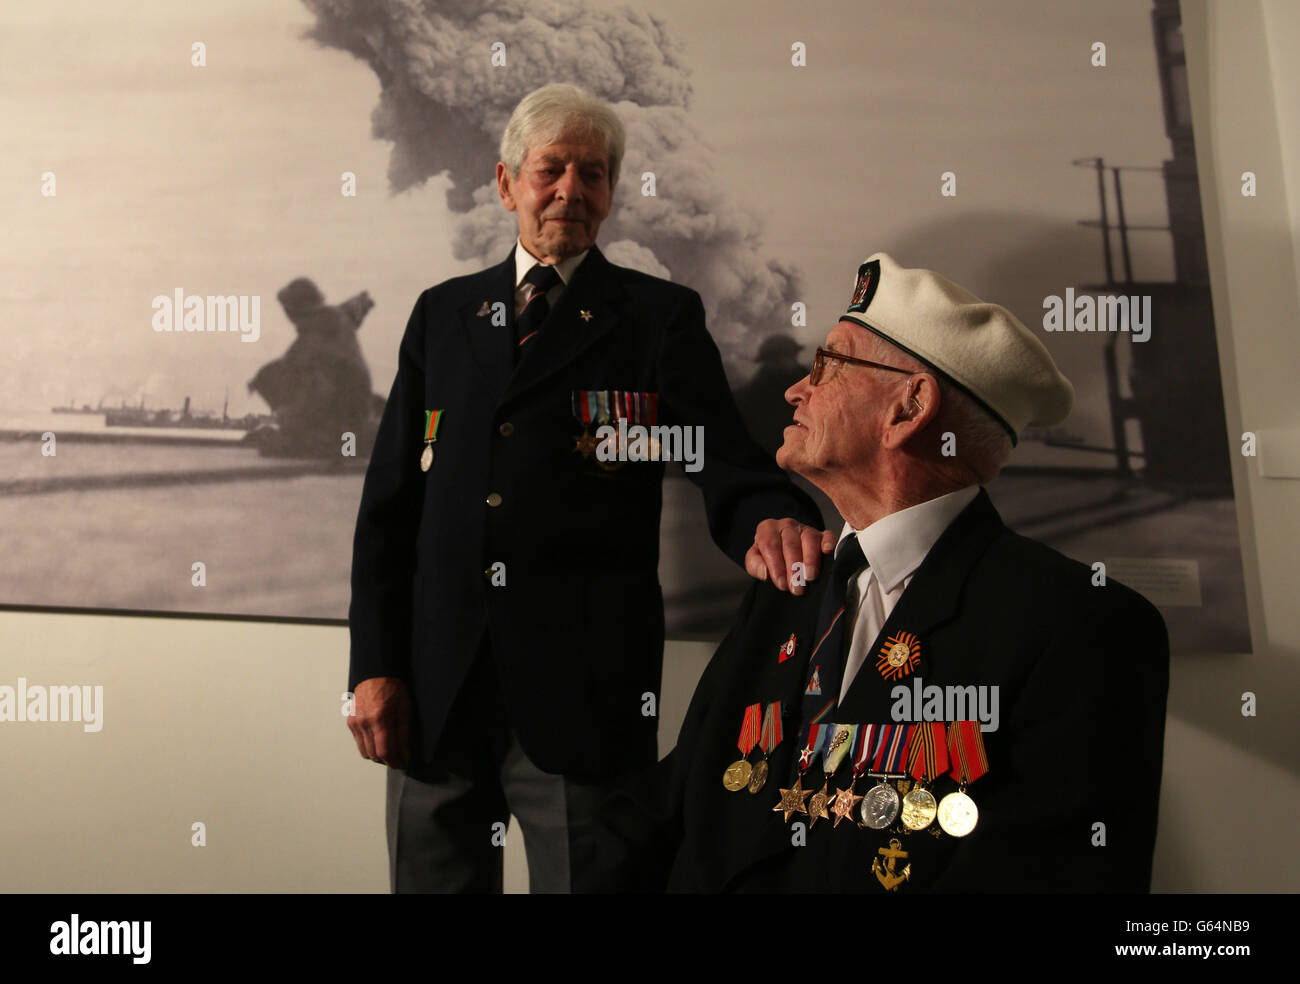 David Craig, a former merchant navy seaman (right) and James Simpson, formerly of the Royal Navy talk at the Arctic Convoys exhibition which opens on May 29 at the National War Museum Edinburgh Castle. The convoys sailed from Britain from in 1941 to 1945 delivering supplies to the Soviet Union. Stock Photo